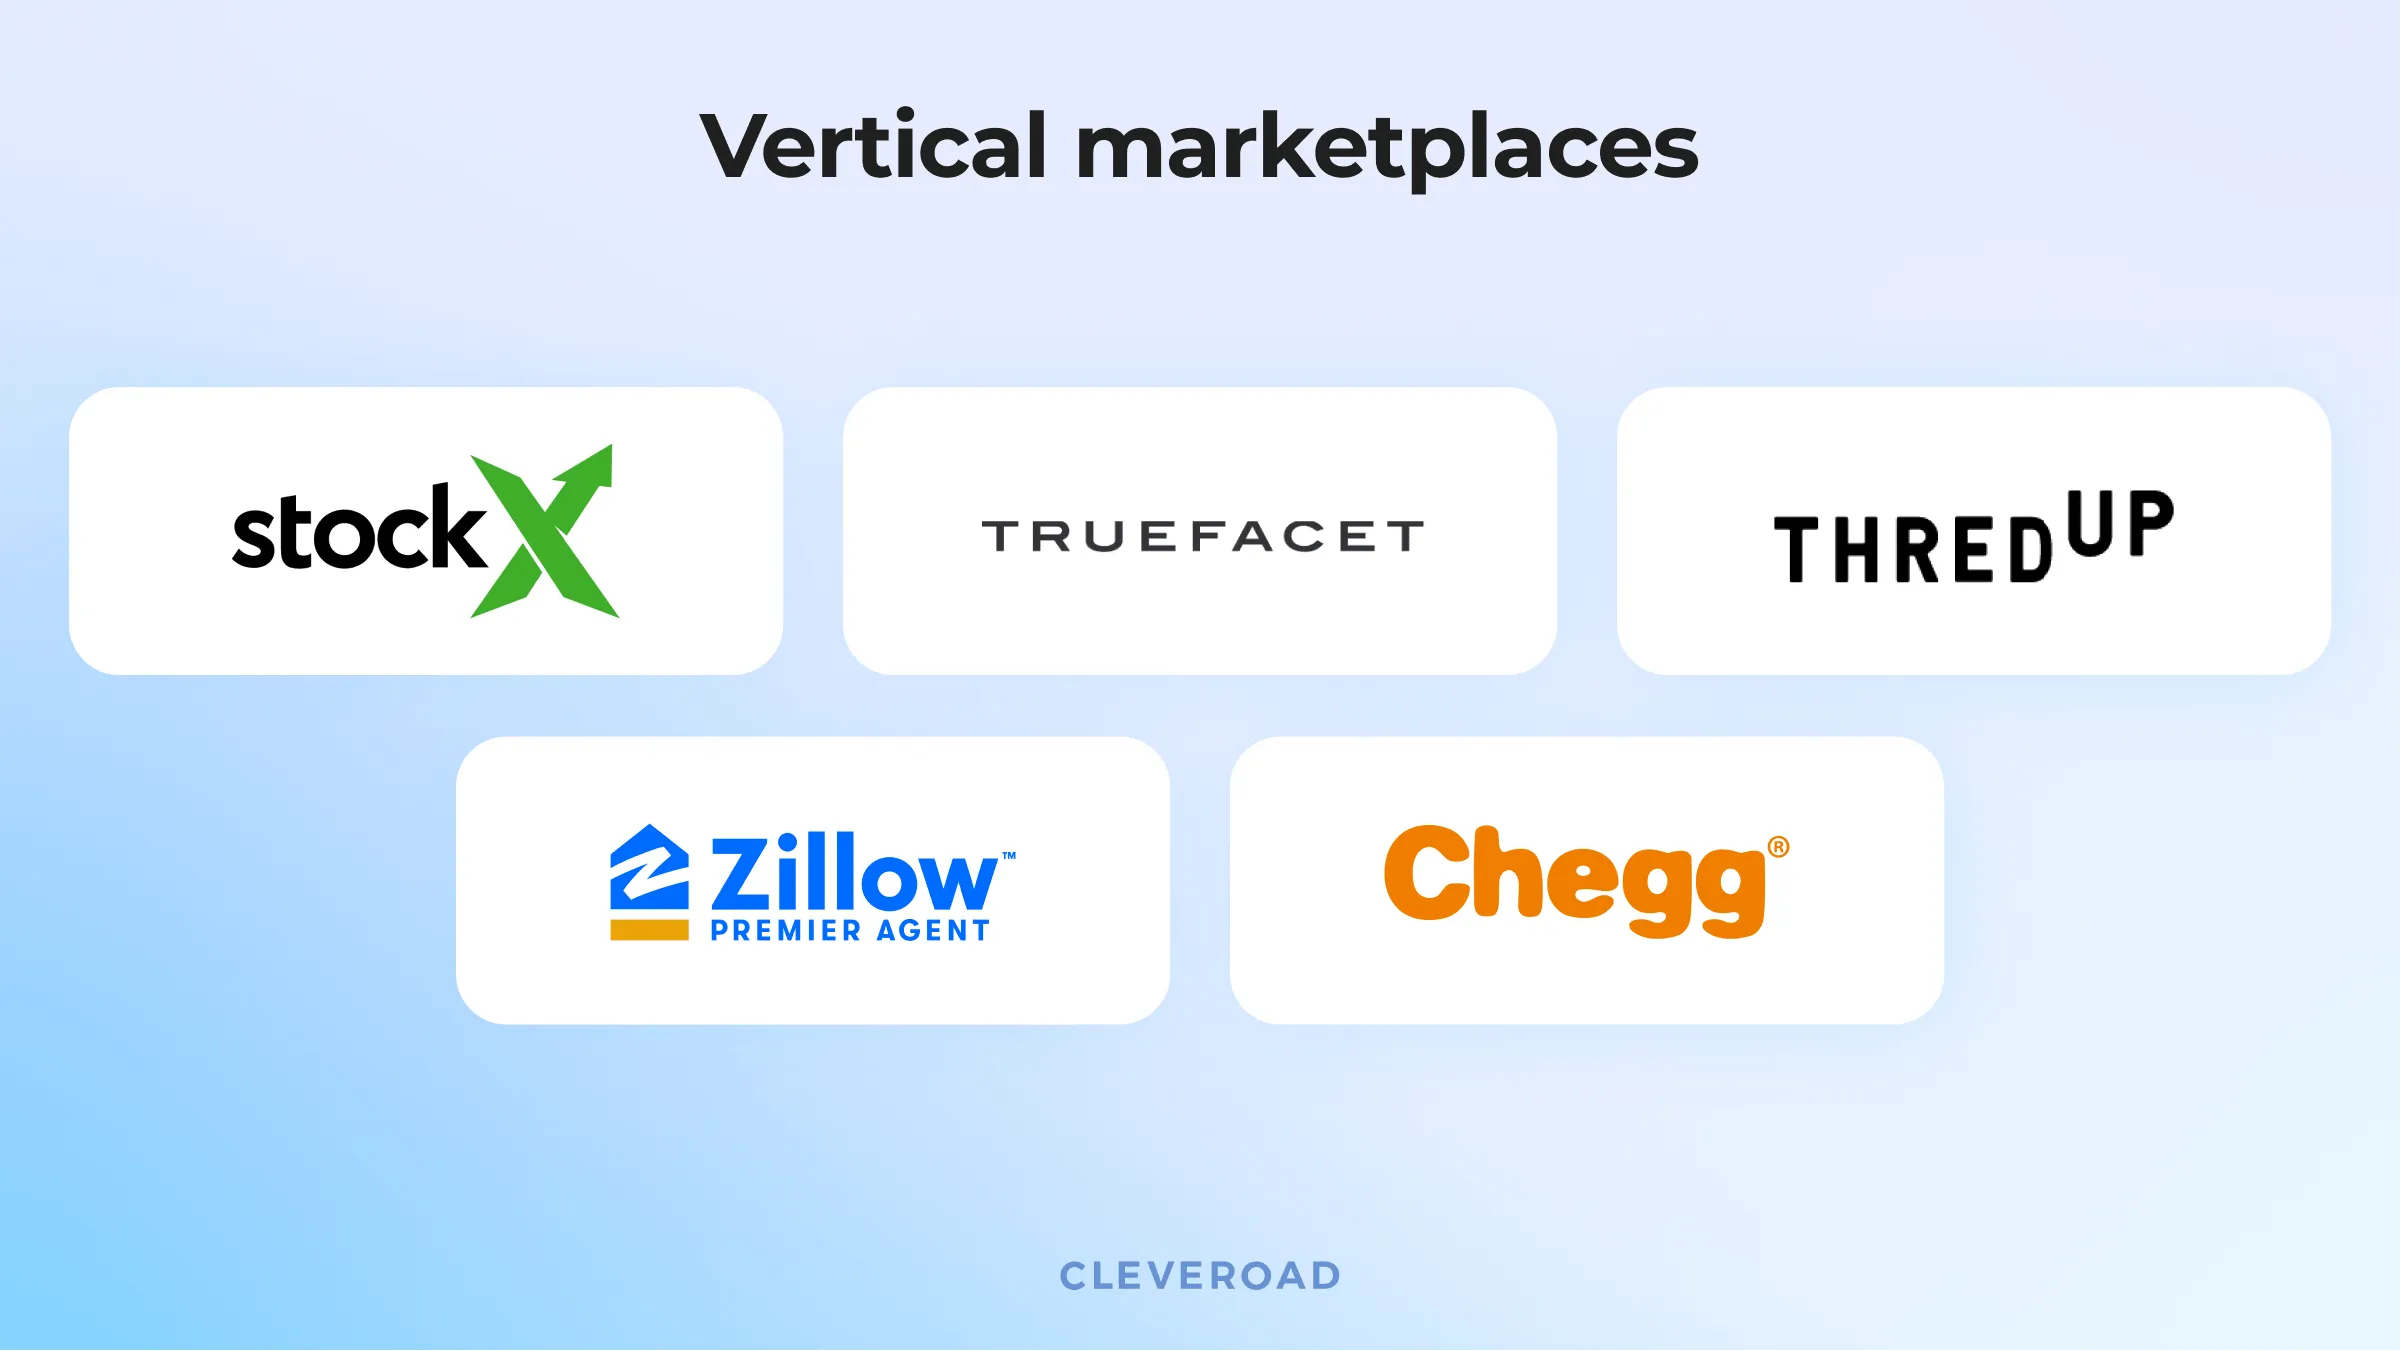 Examples of vertical marketplaces